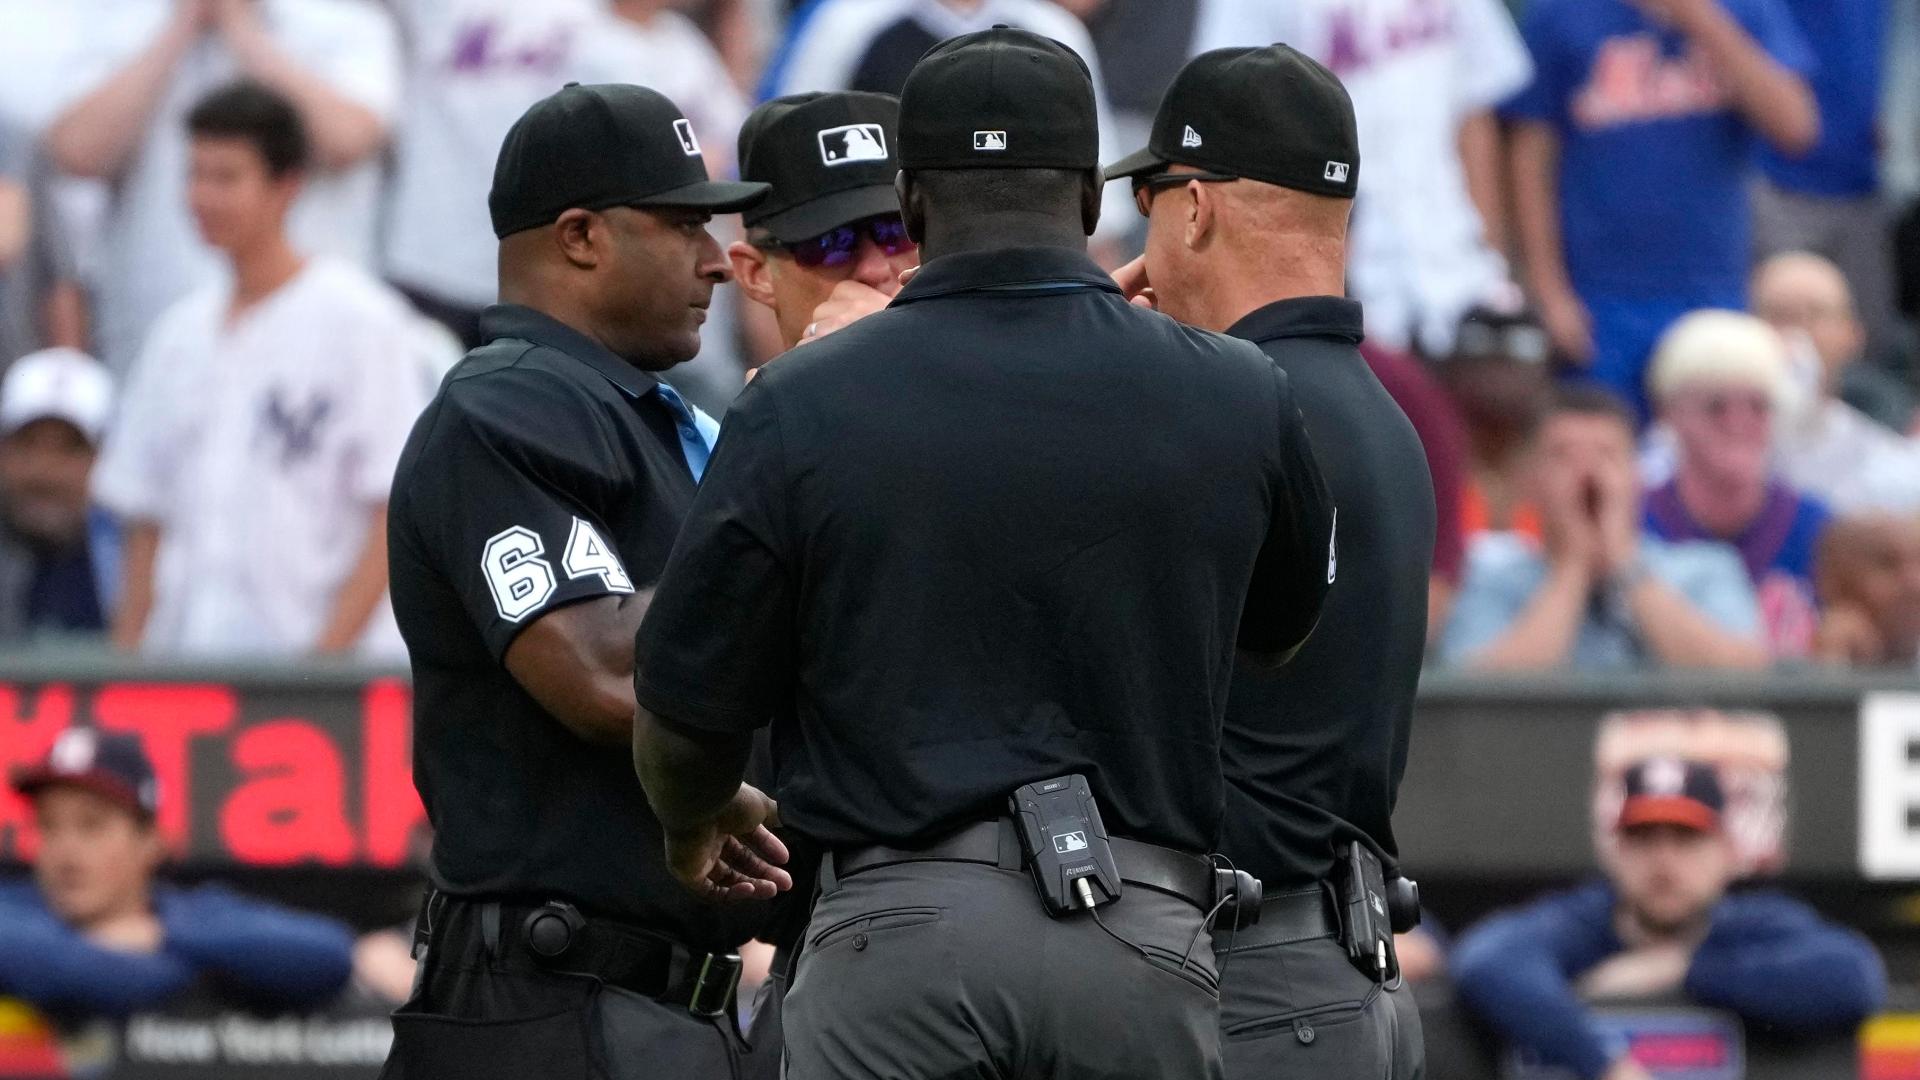 'That's embarrassing!': Mets booth rips umps for losing track of count